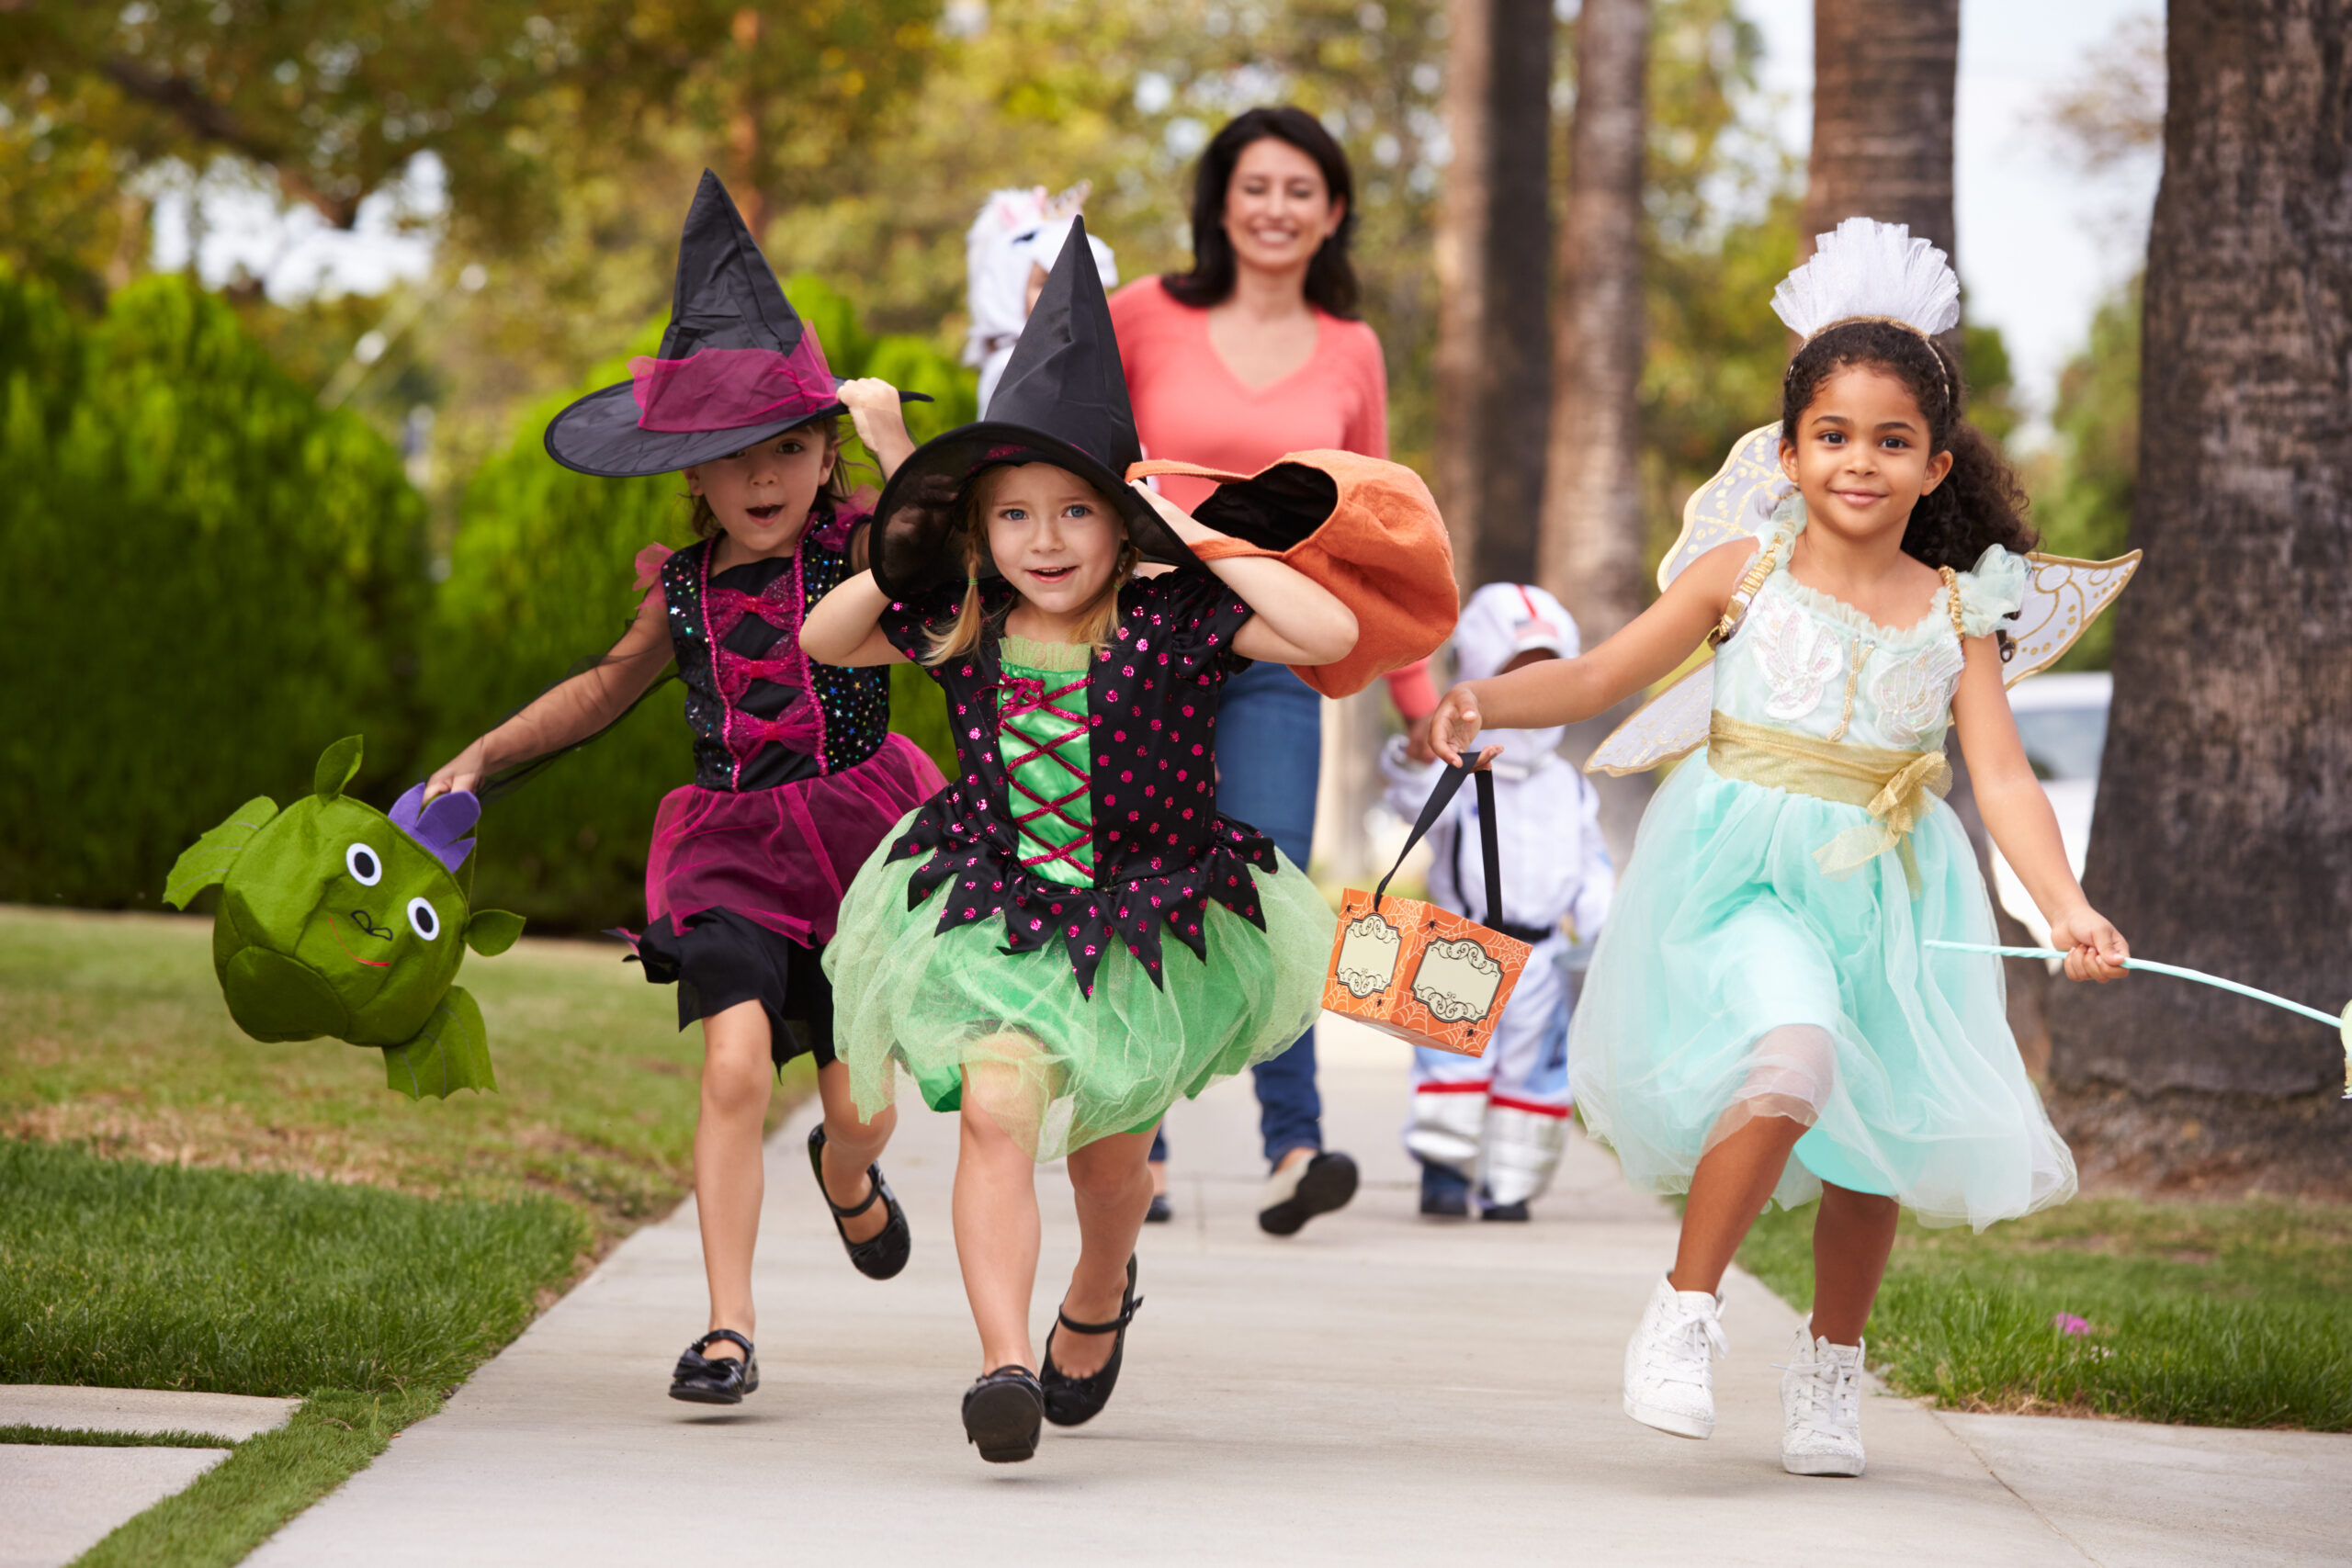 15+ Ways To Have A Healthier Halloween